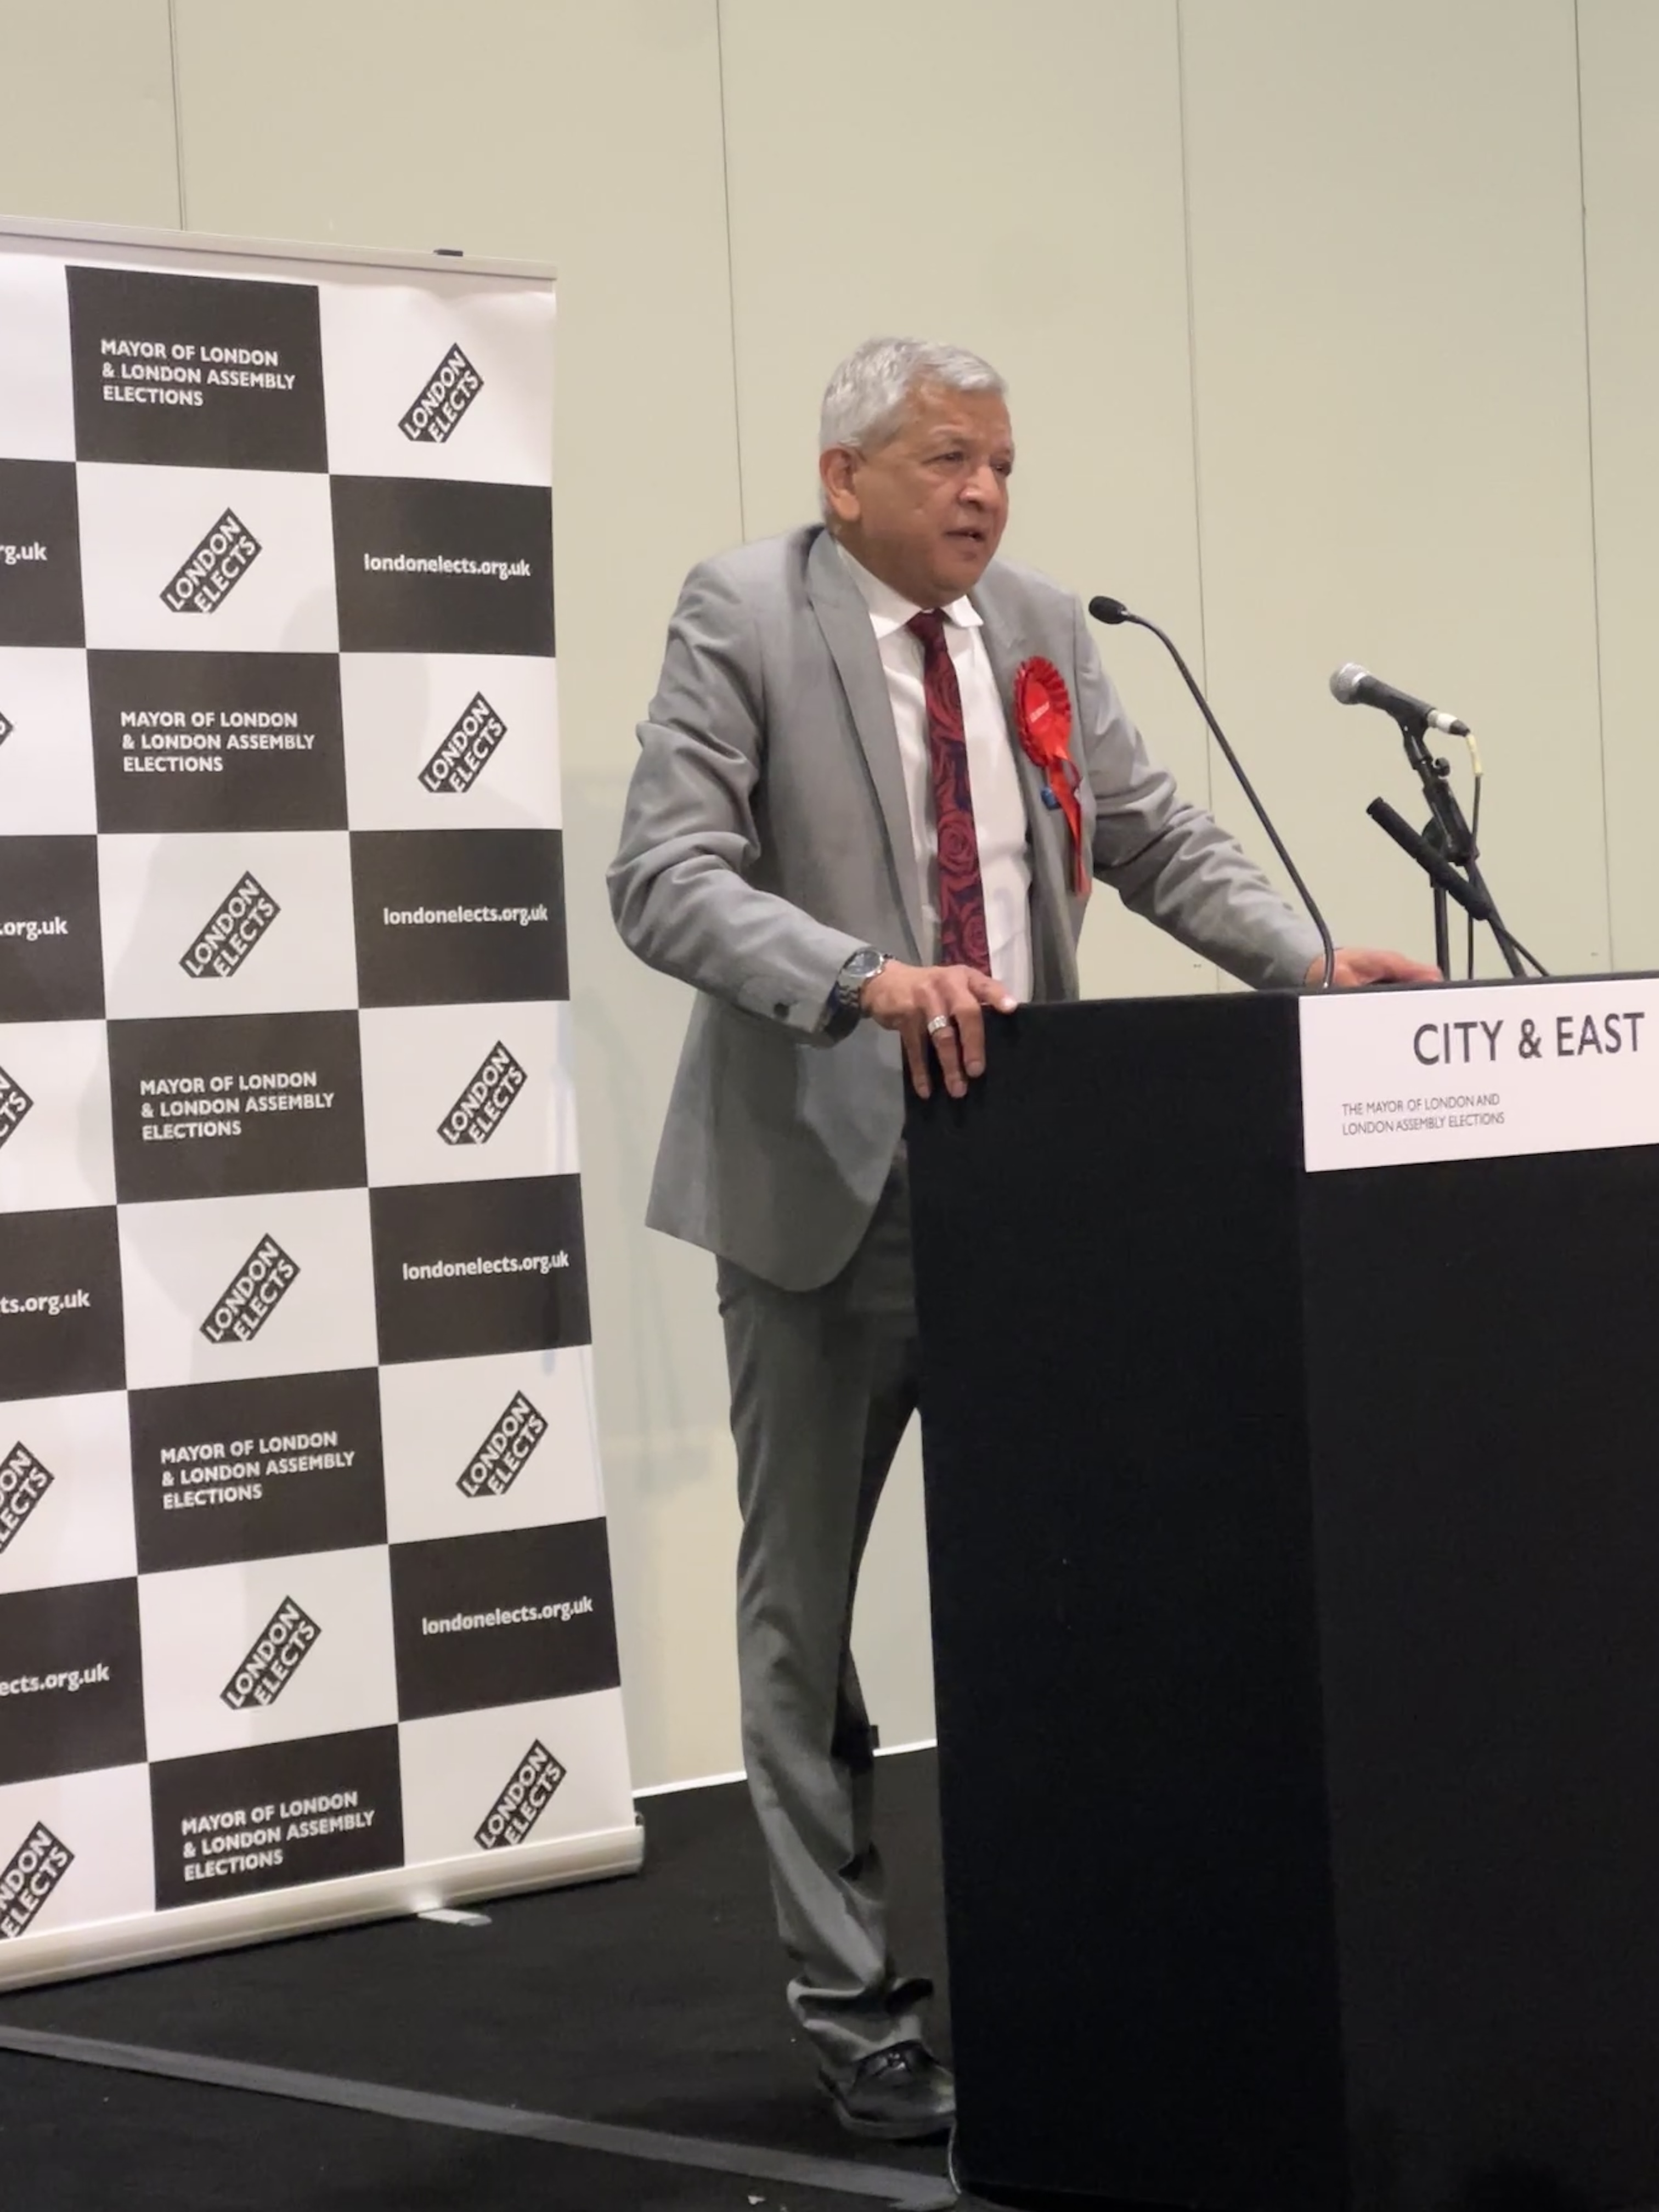 Unmesh Desai elected as London Assembly Member for City and East – Newham Council